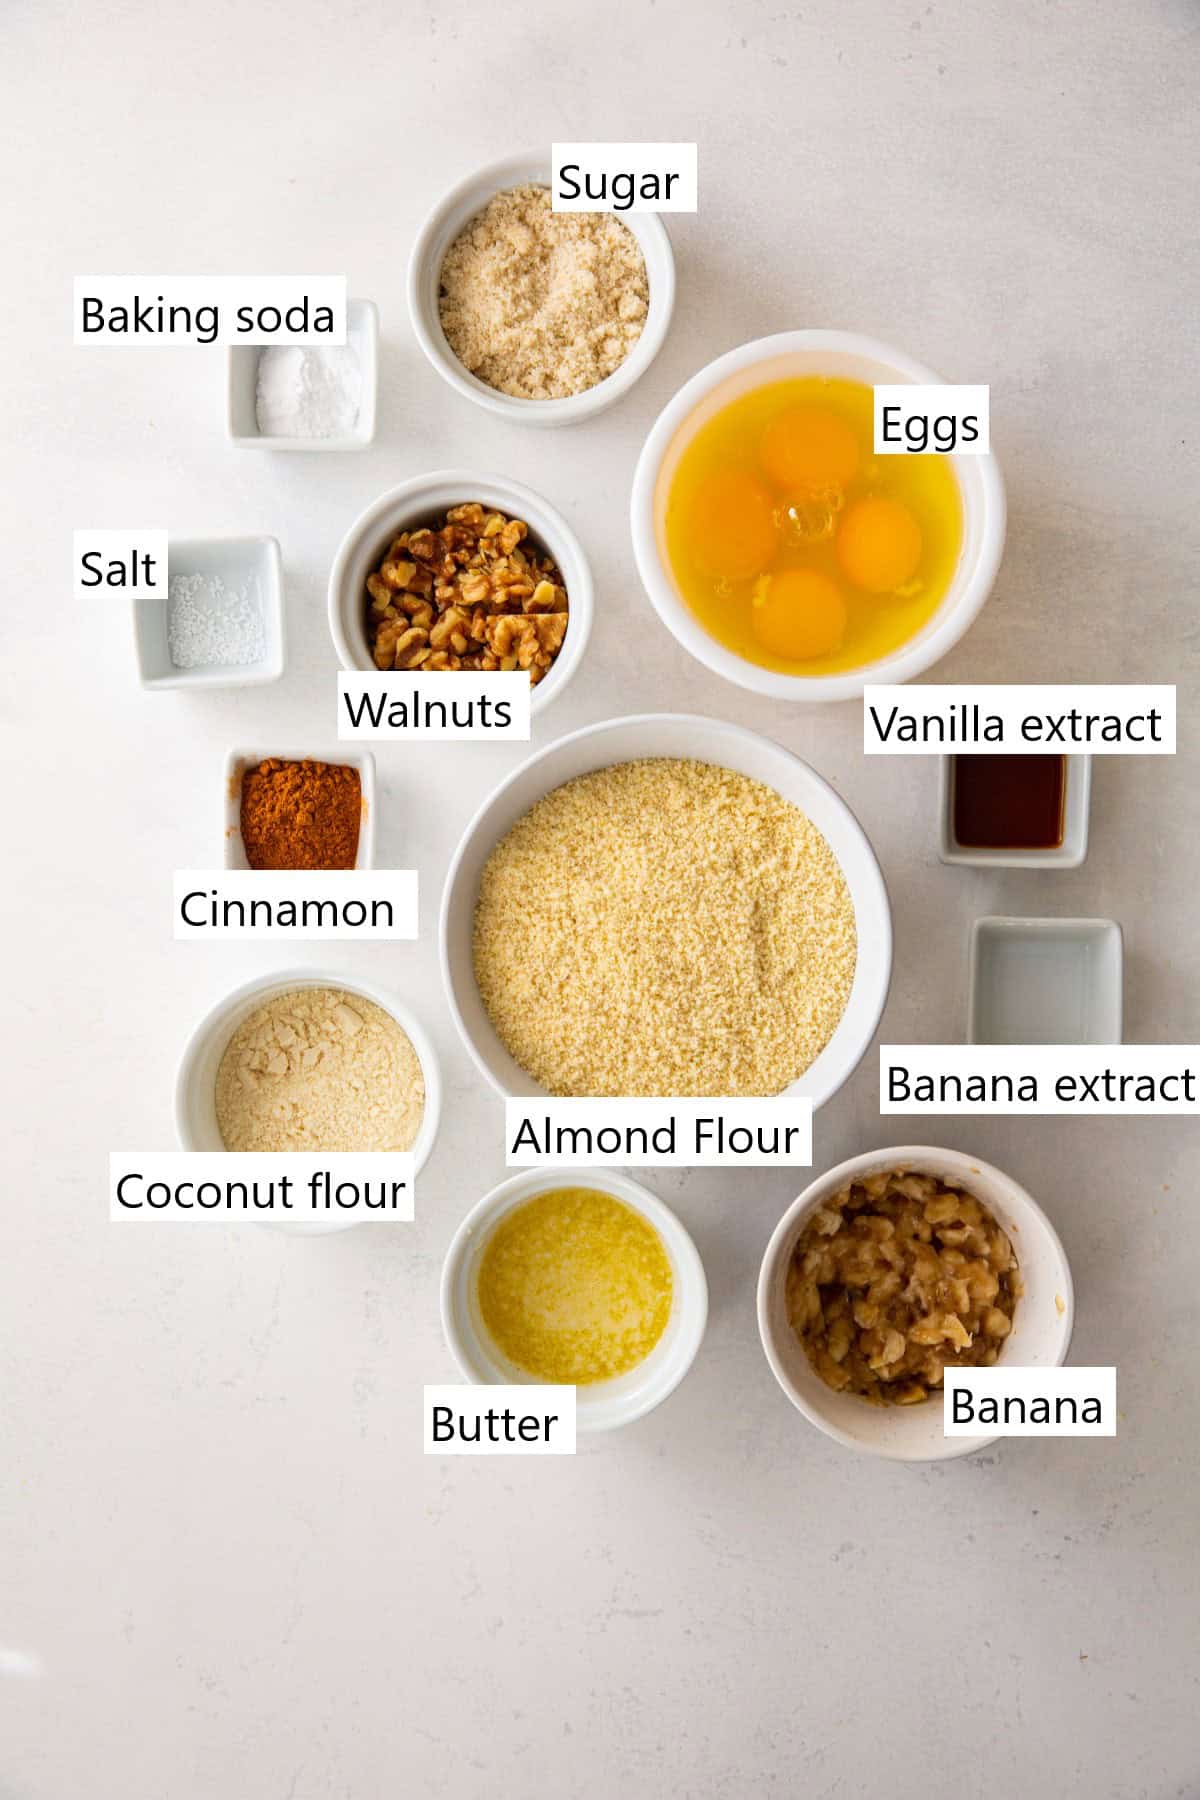 All of the ingredients needed to make Keto banana bread in separate bowls on a counter.